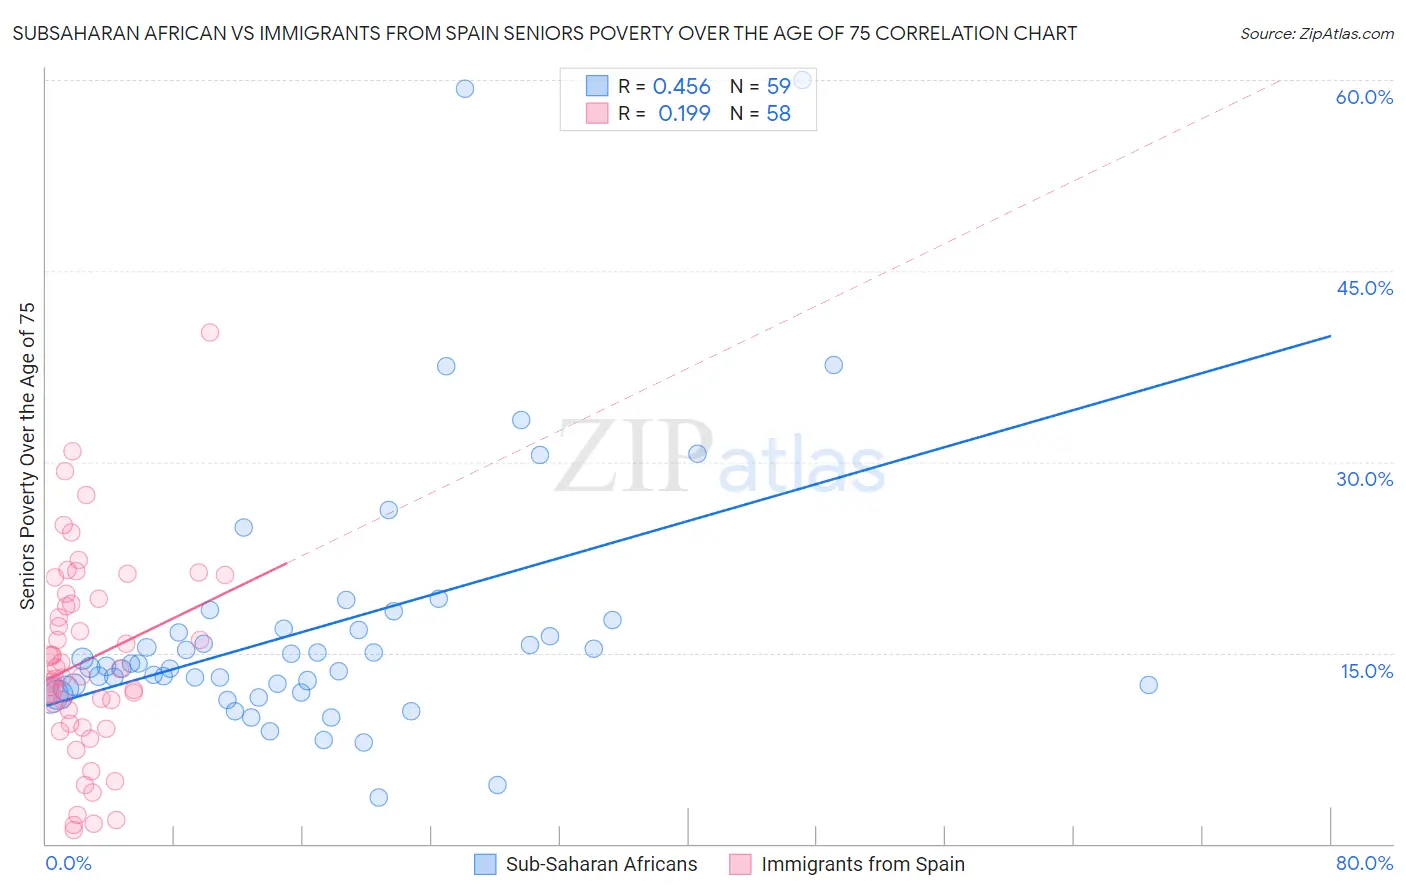 Subsaharan African vs Immigrants from Spain Seniors Poverty Over the Age of 75